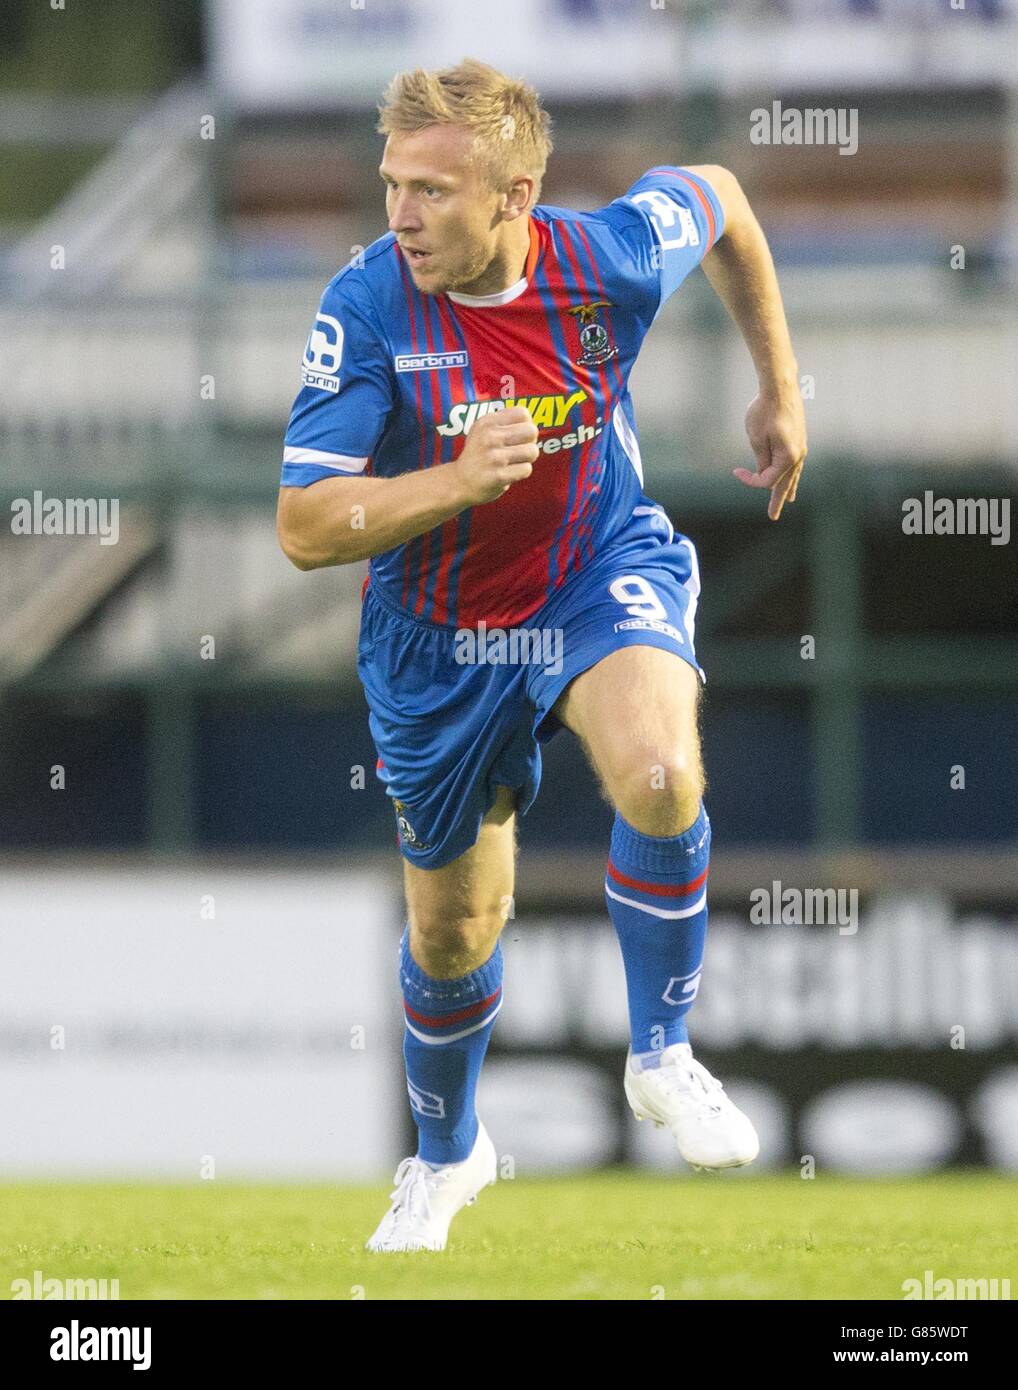 Inverness Caledonian Thistle's Richie Foran is brought on as a substitute during the Europa League Second Qualifying Round, First Leg, at Caledonian Stadium, Inverness, Scotland. PRESS ASSOCIATION Photo. Picture date: Thursday July 16, 2015. See PA story SOCCER Inverness. Photo credit should read: Jeff Holmes/PA Wire. Stock Photo